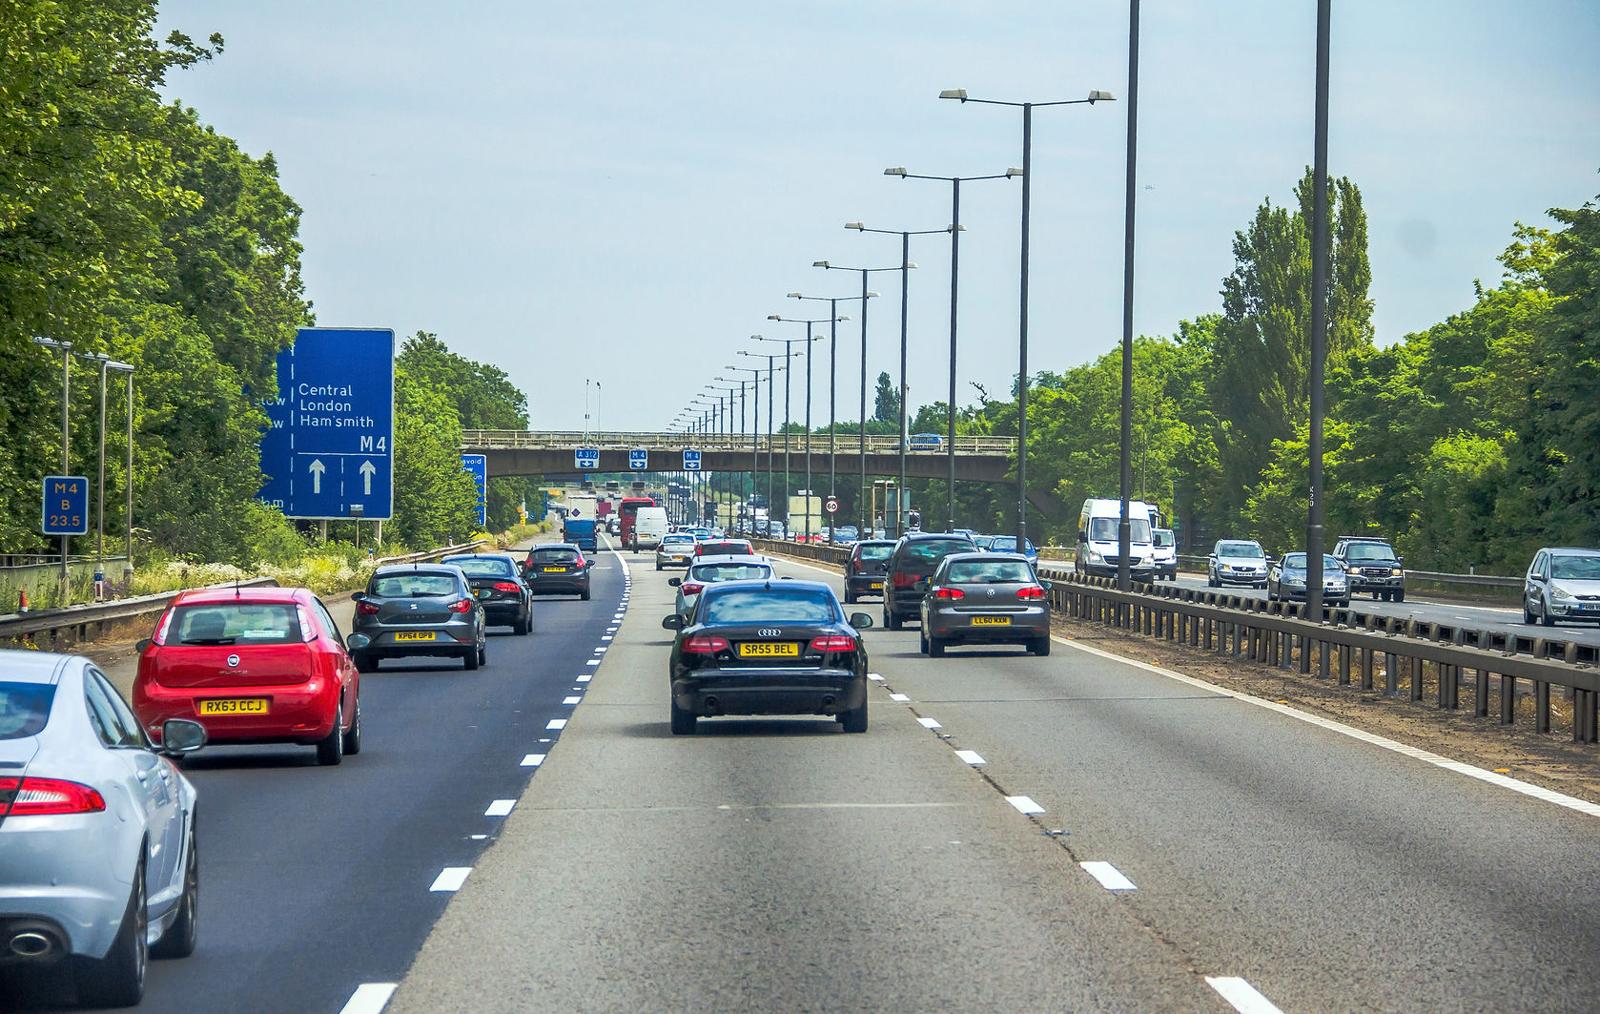 A busy motorway in the UK